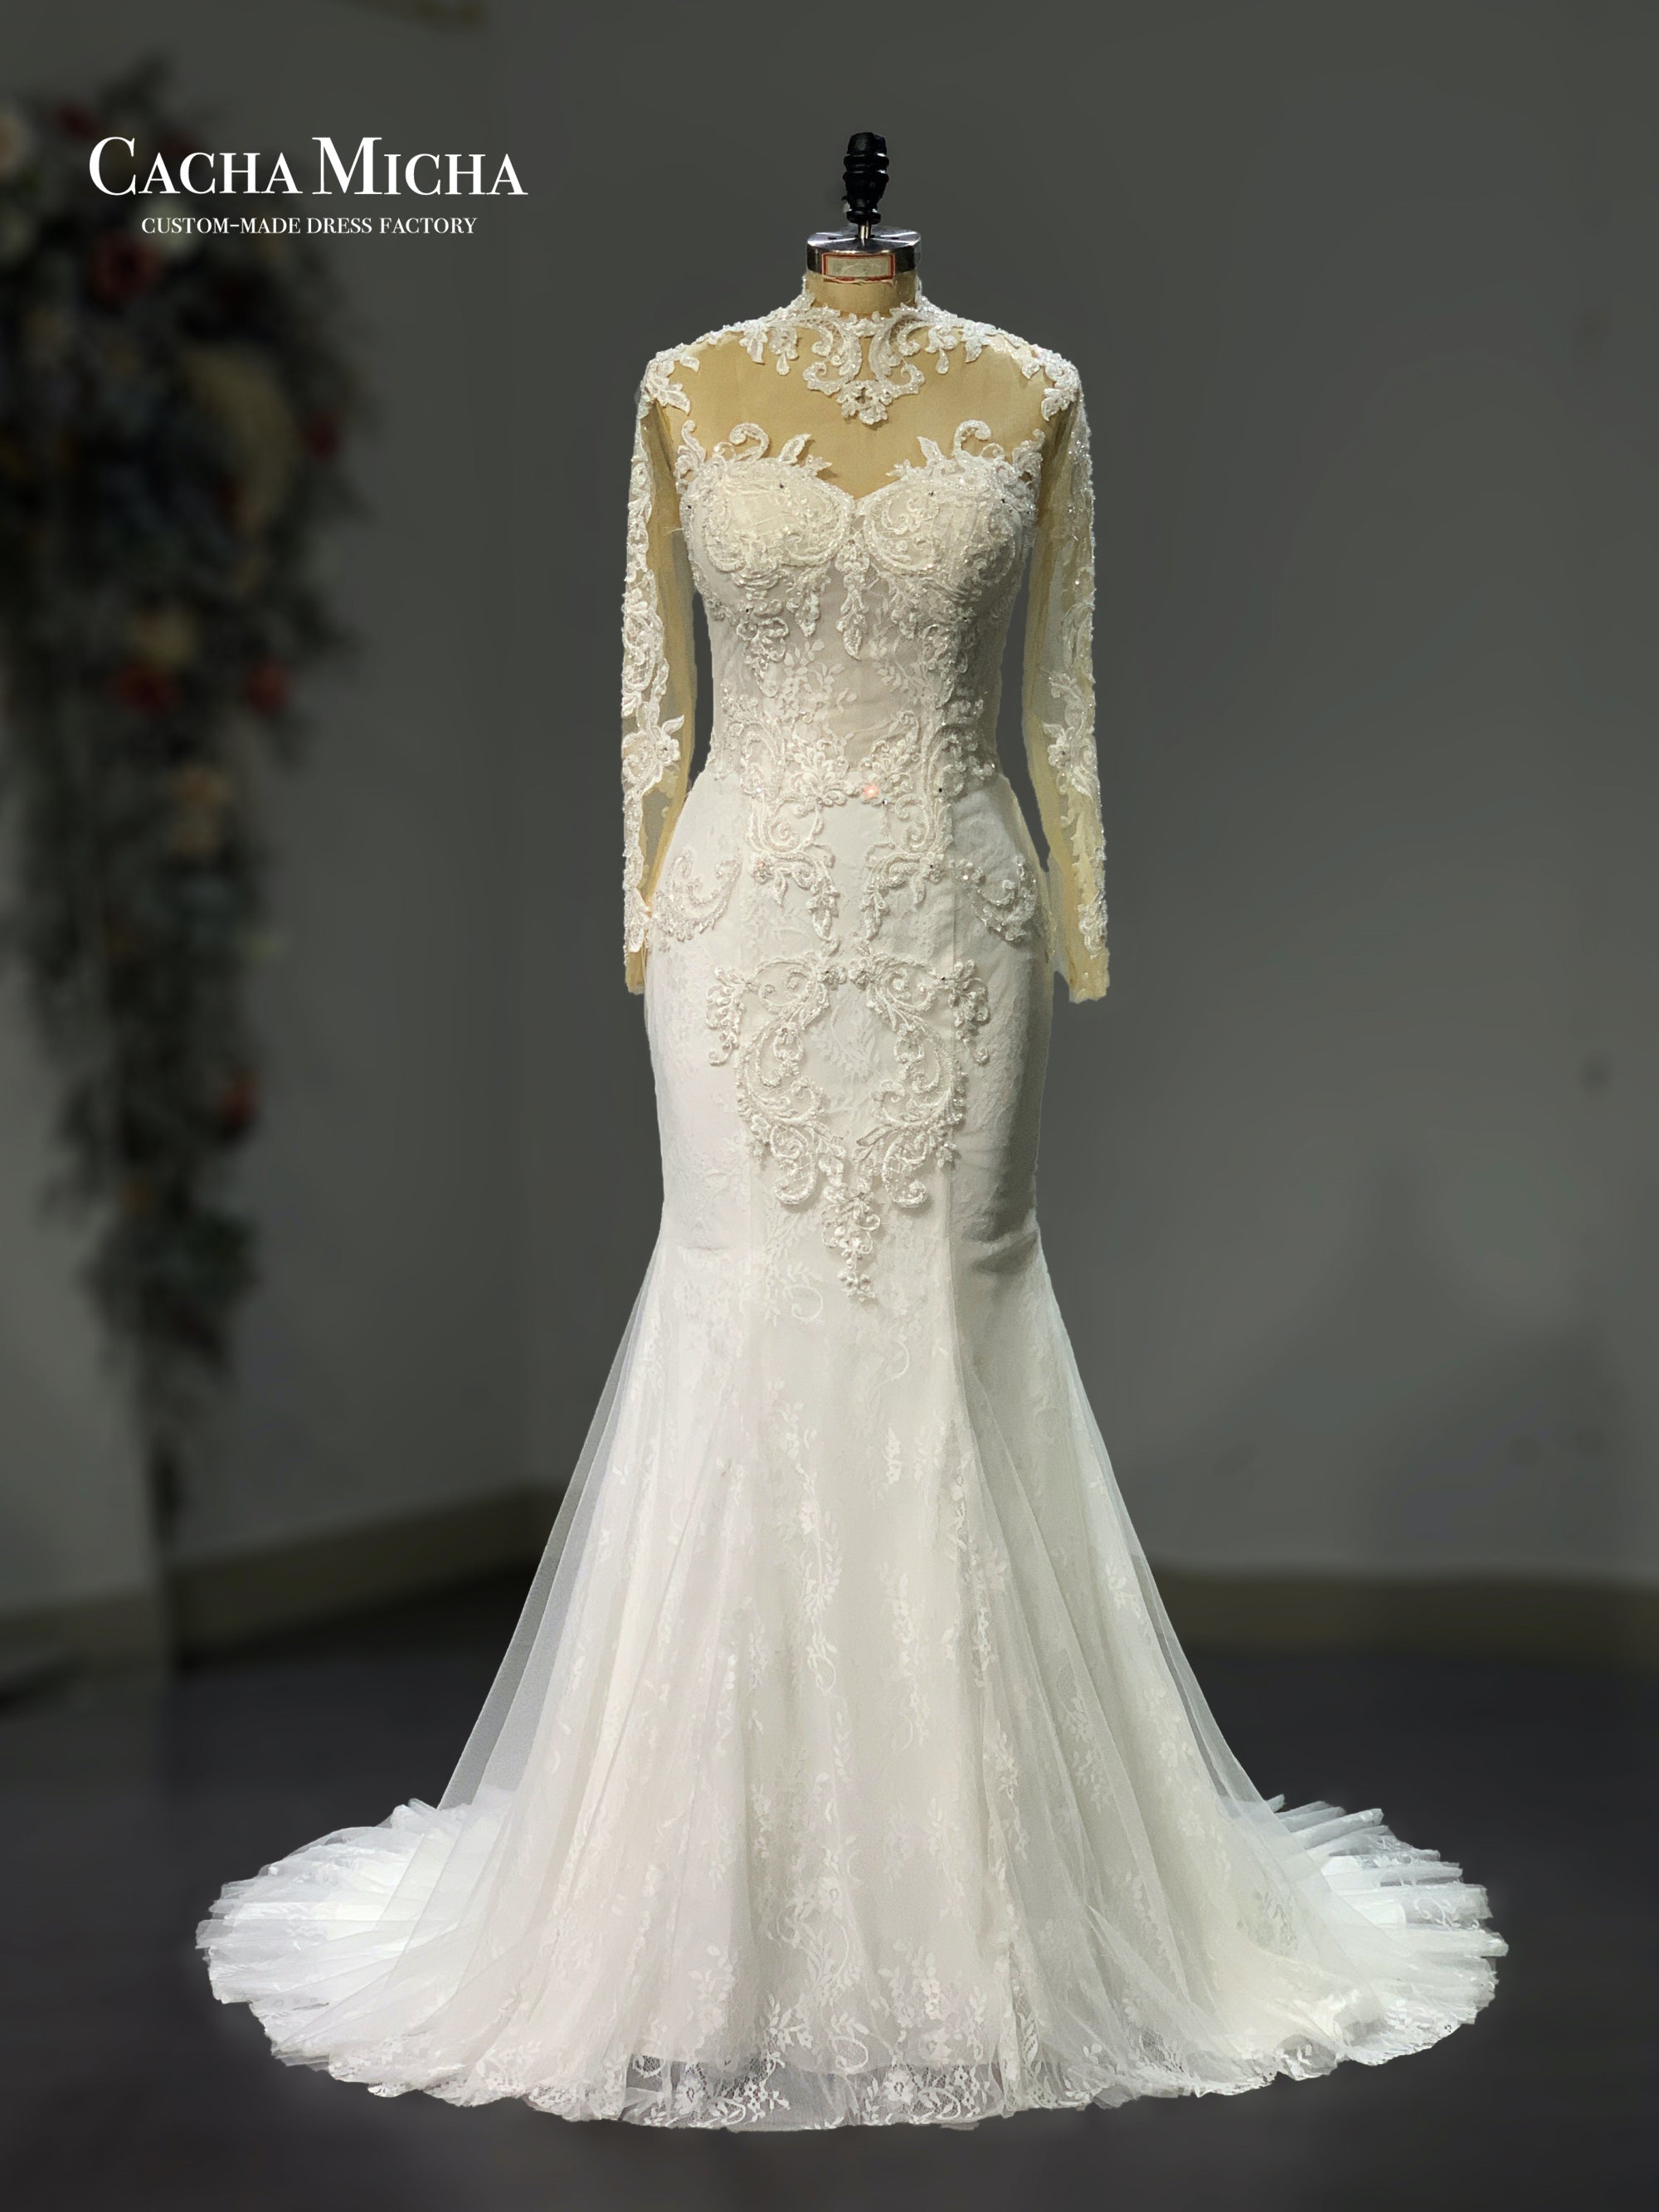 Ready to Ship 2 Pieces Beaded Lace Mermaid Wedding Dress R3563